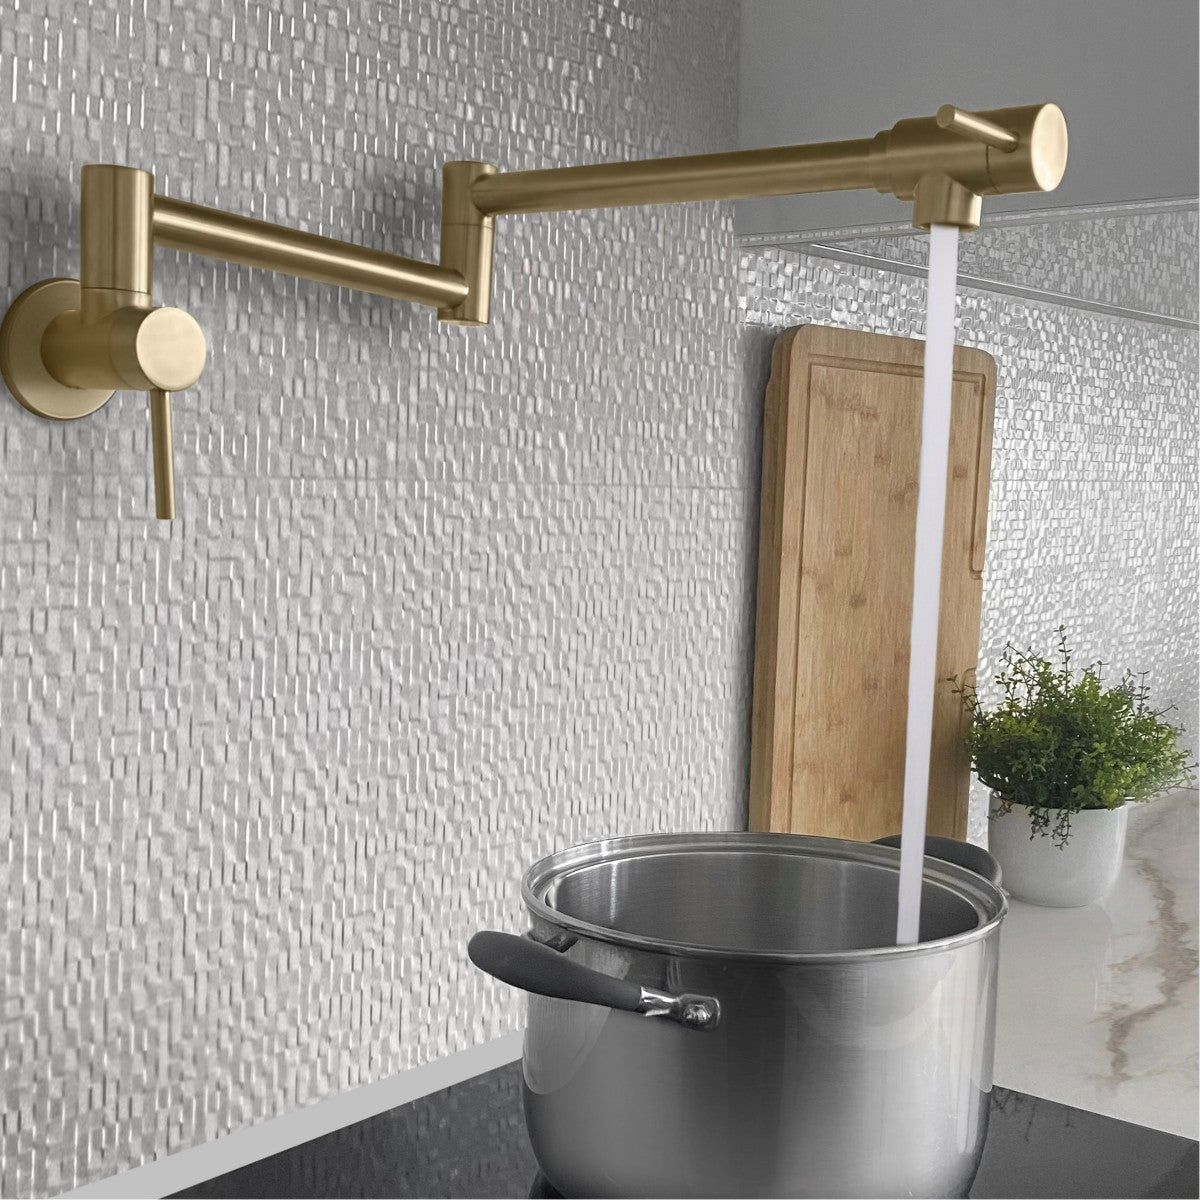 Stylish ASTI Stainless Steel Wall Mount Pot Filler Folding Stretchable with Single Hole Two Handles - Brushed Gold Finish K-145G